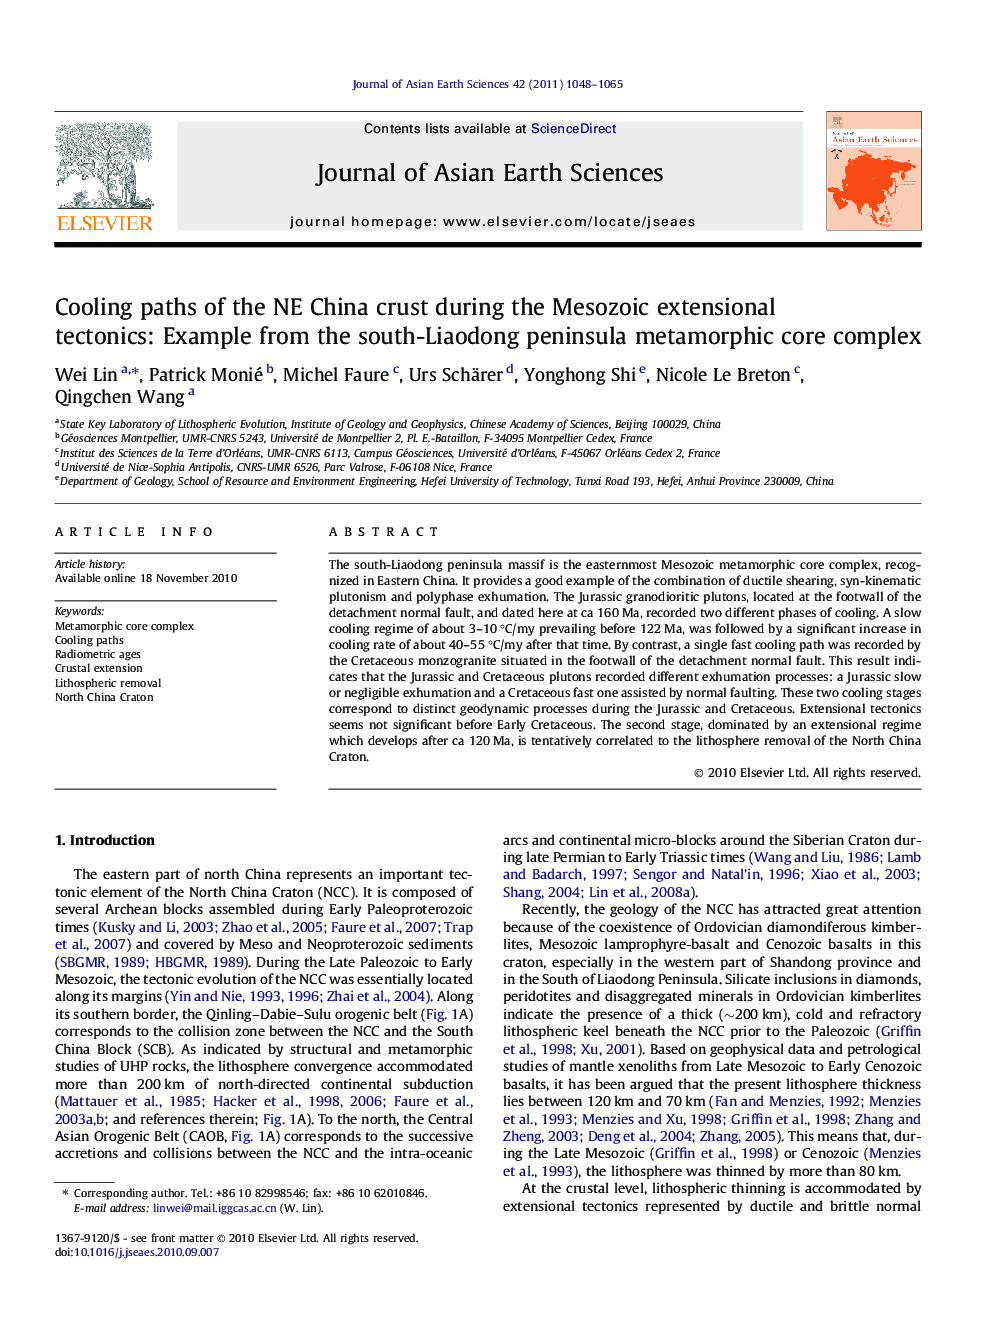 Cooling paths of the NE China crust during the Mesozoic extensional tectonics: Example from the south-Liaodong peninsula metamorphic core complex